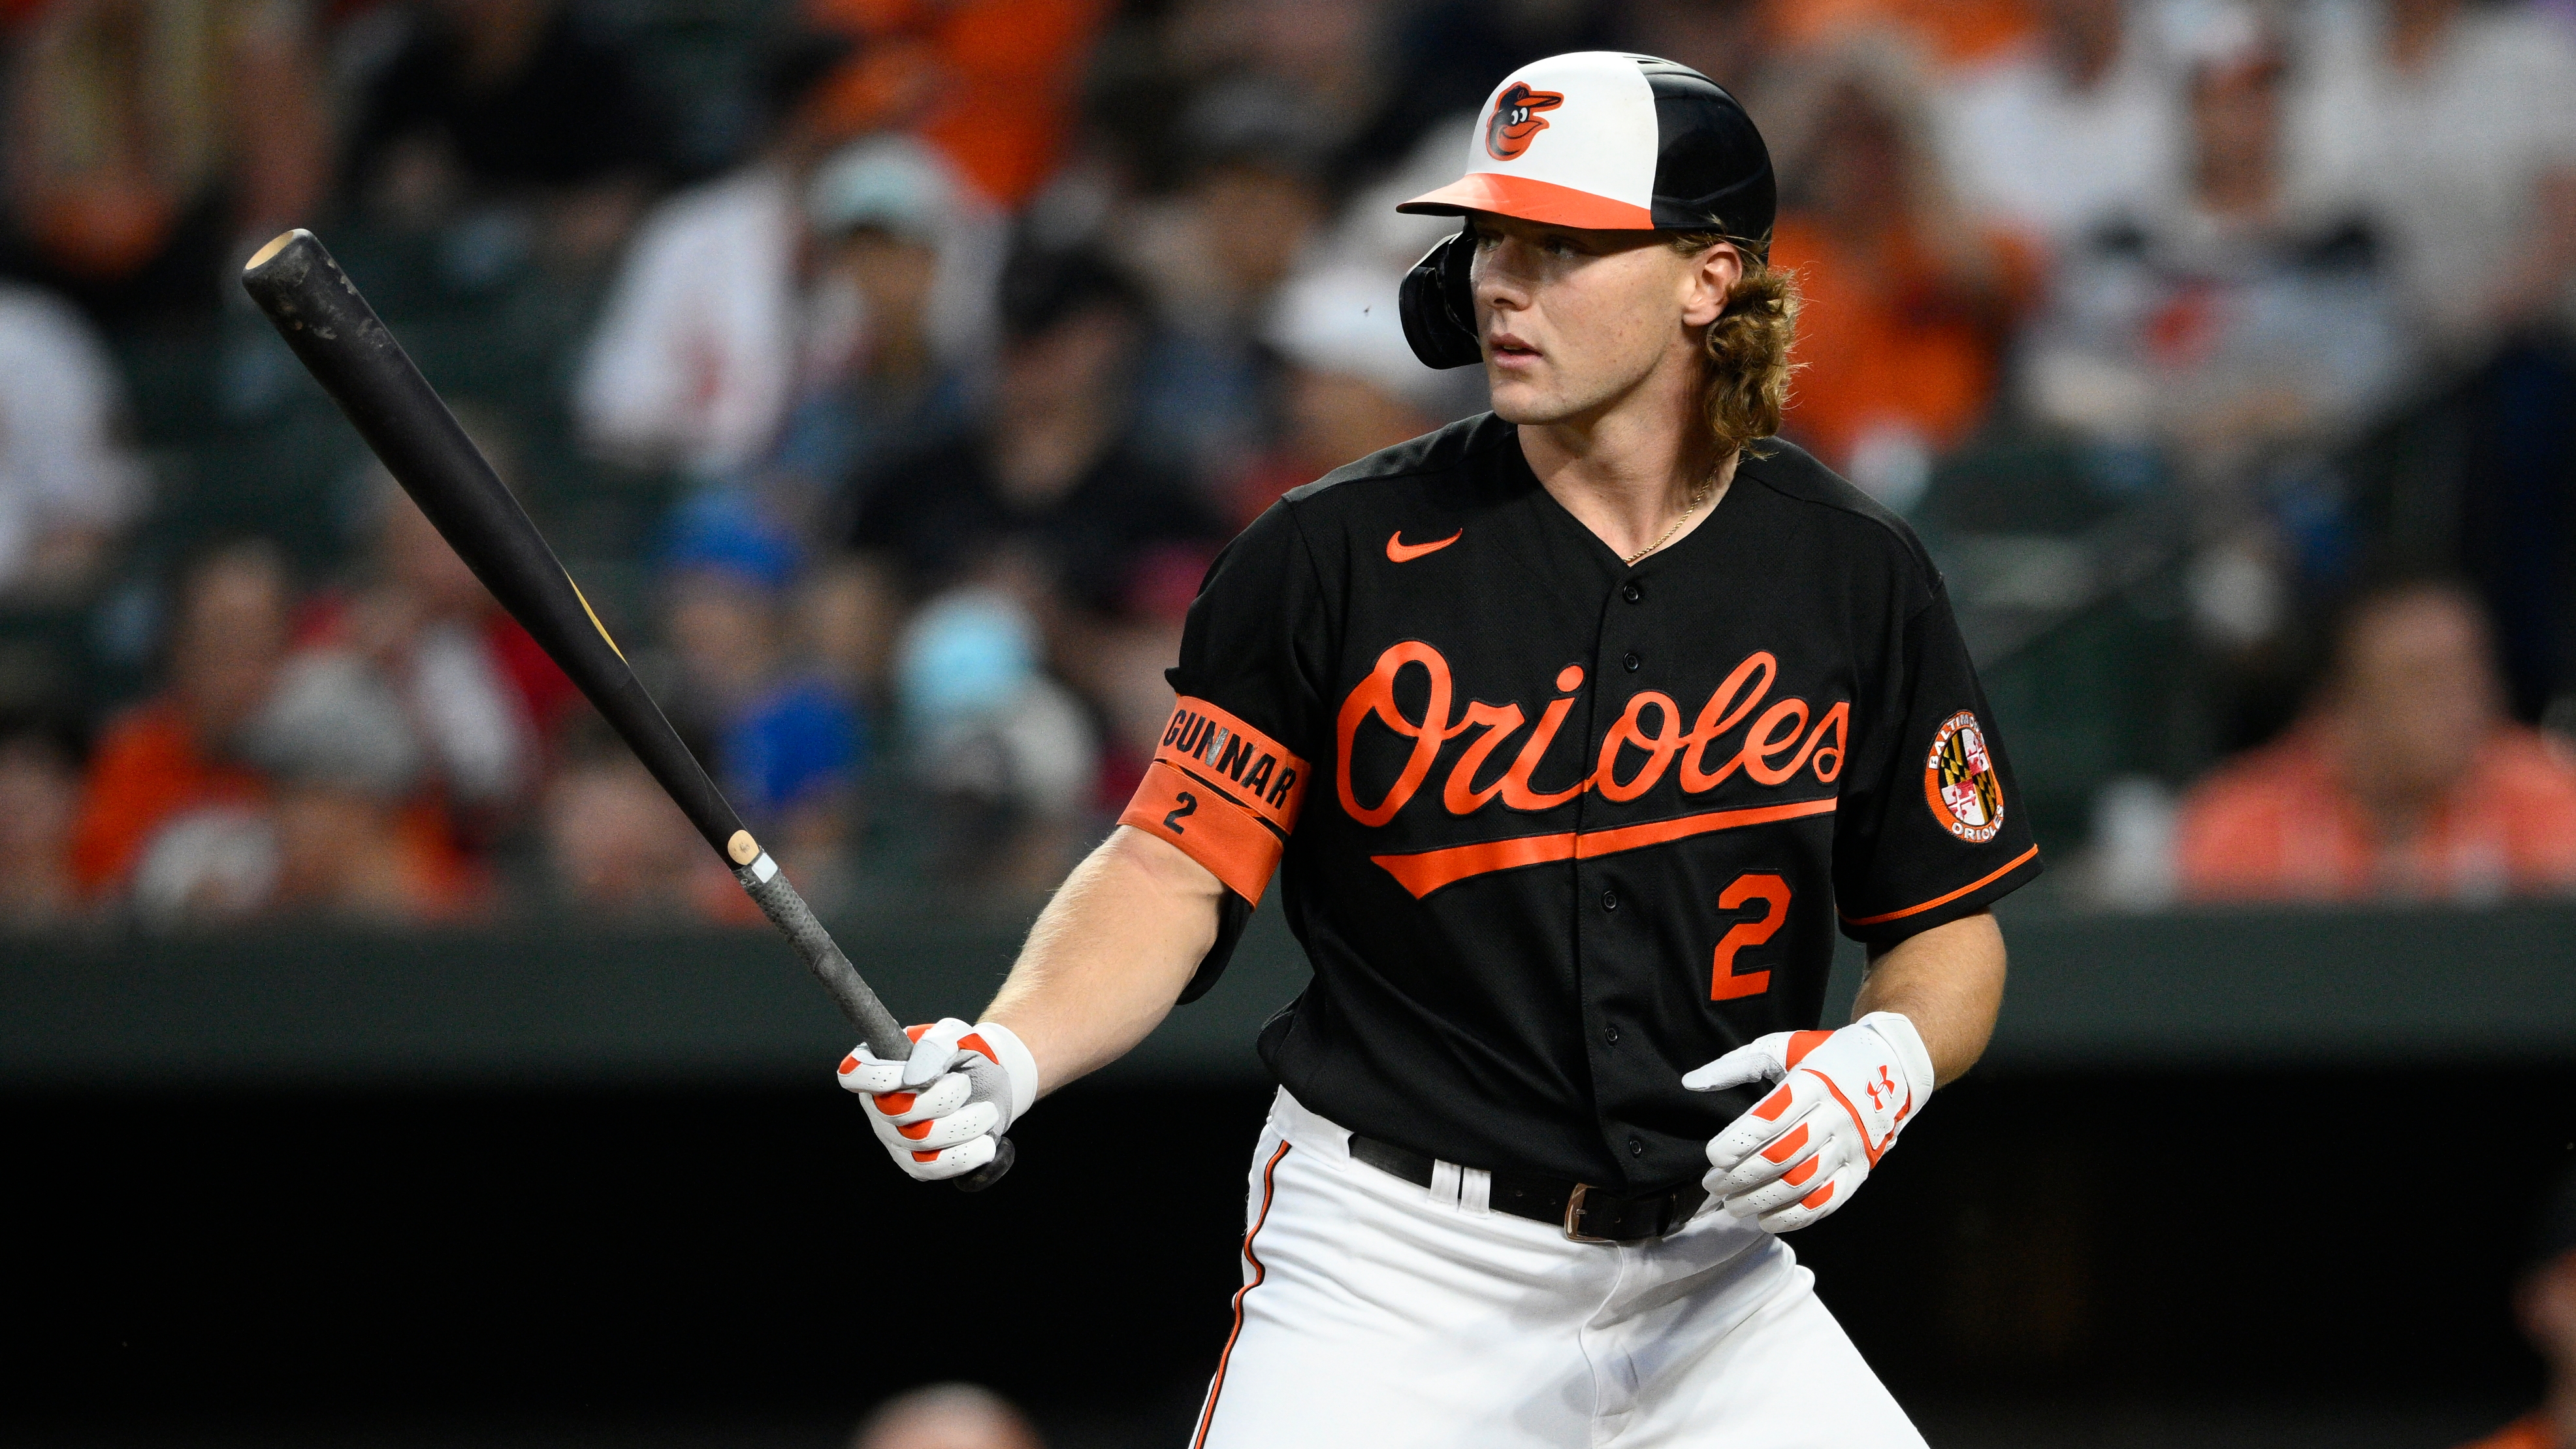 Baltimore Orioles: Ranking the Top 5 Hats and Uniforms in Orioles